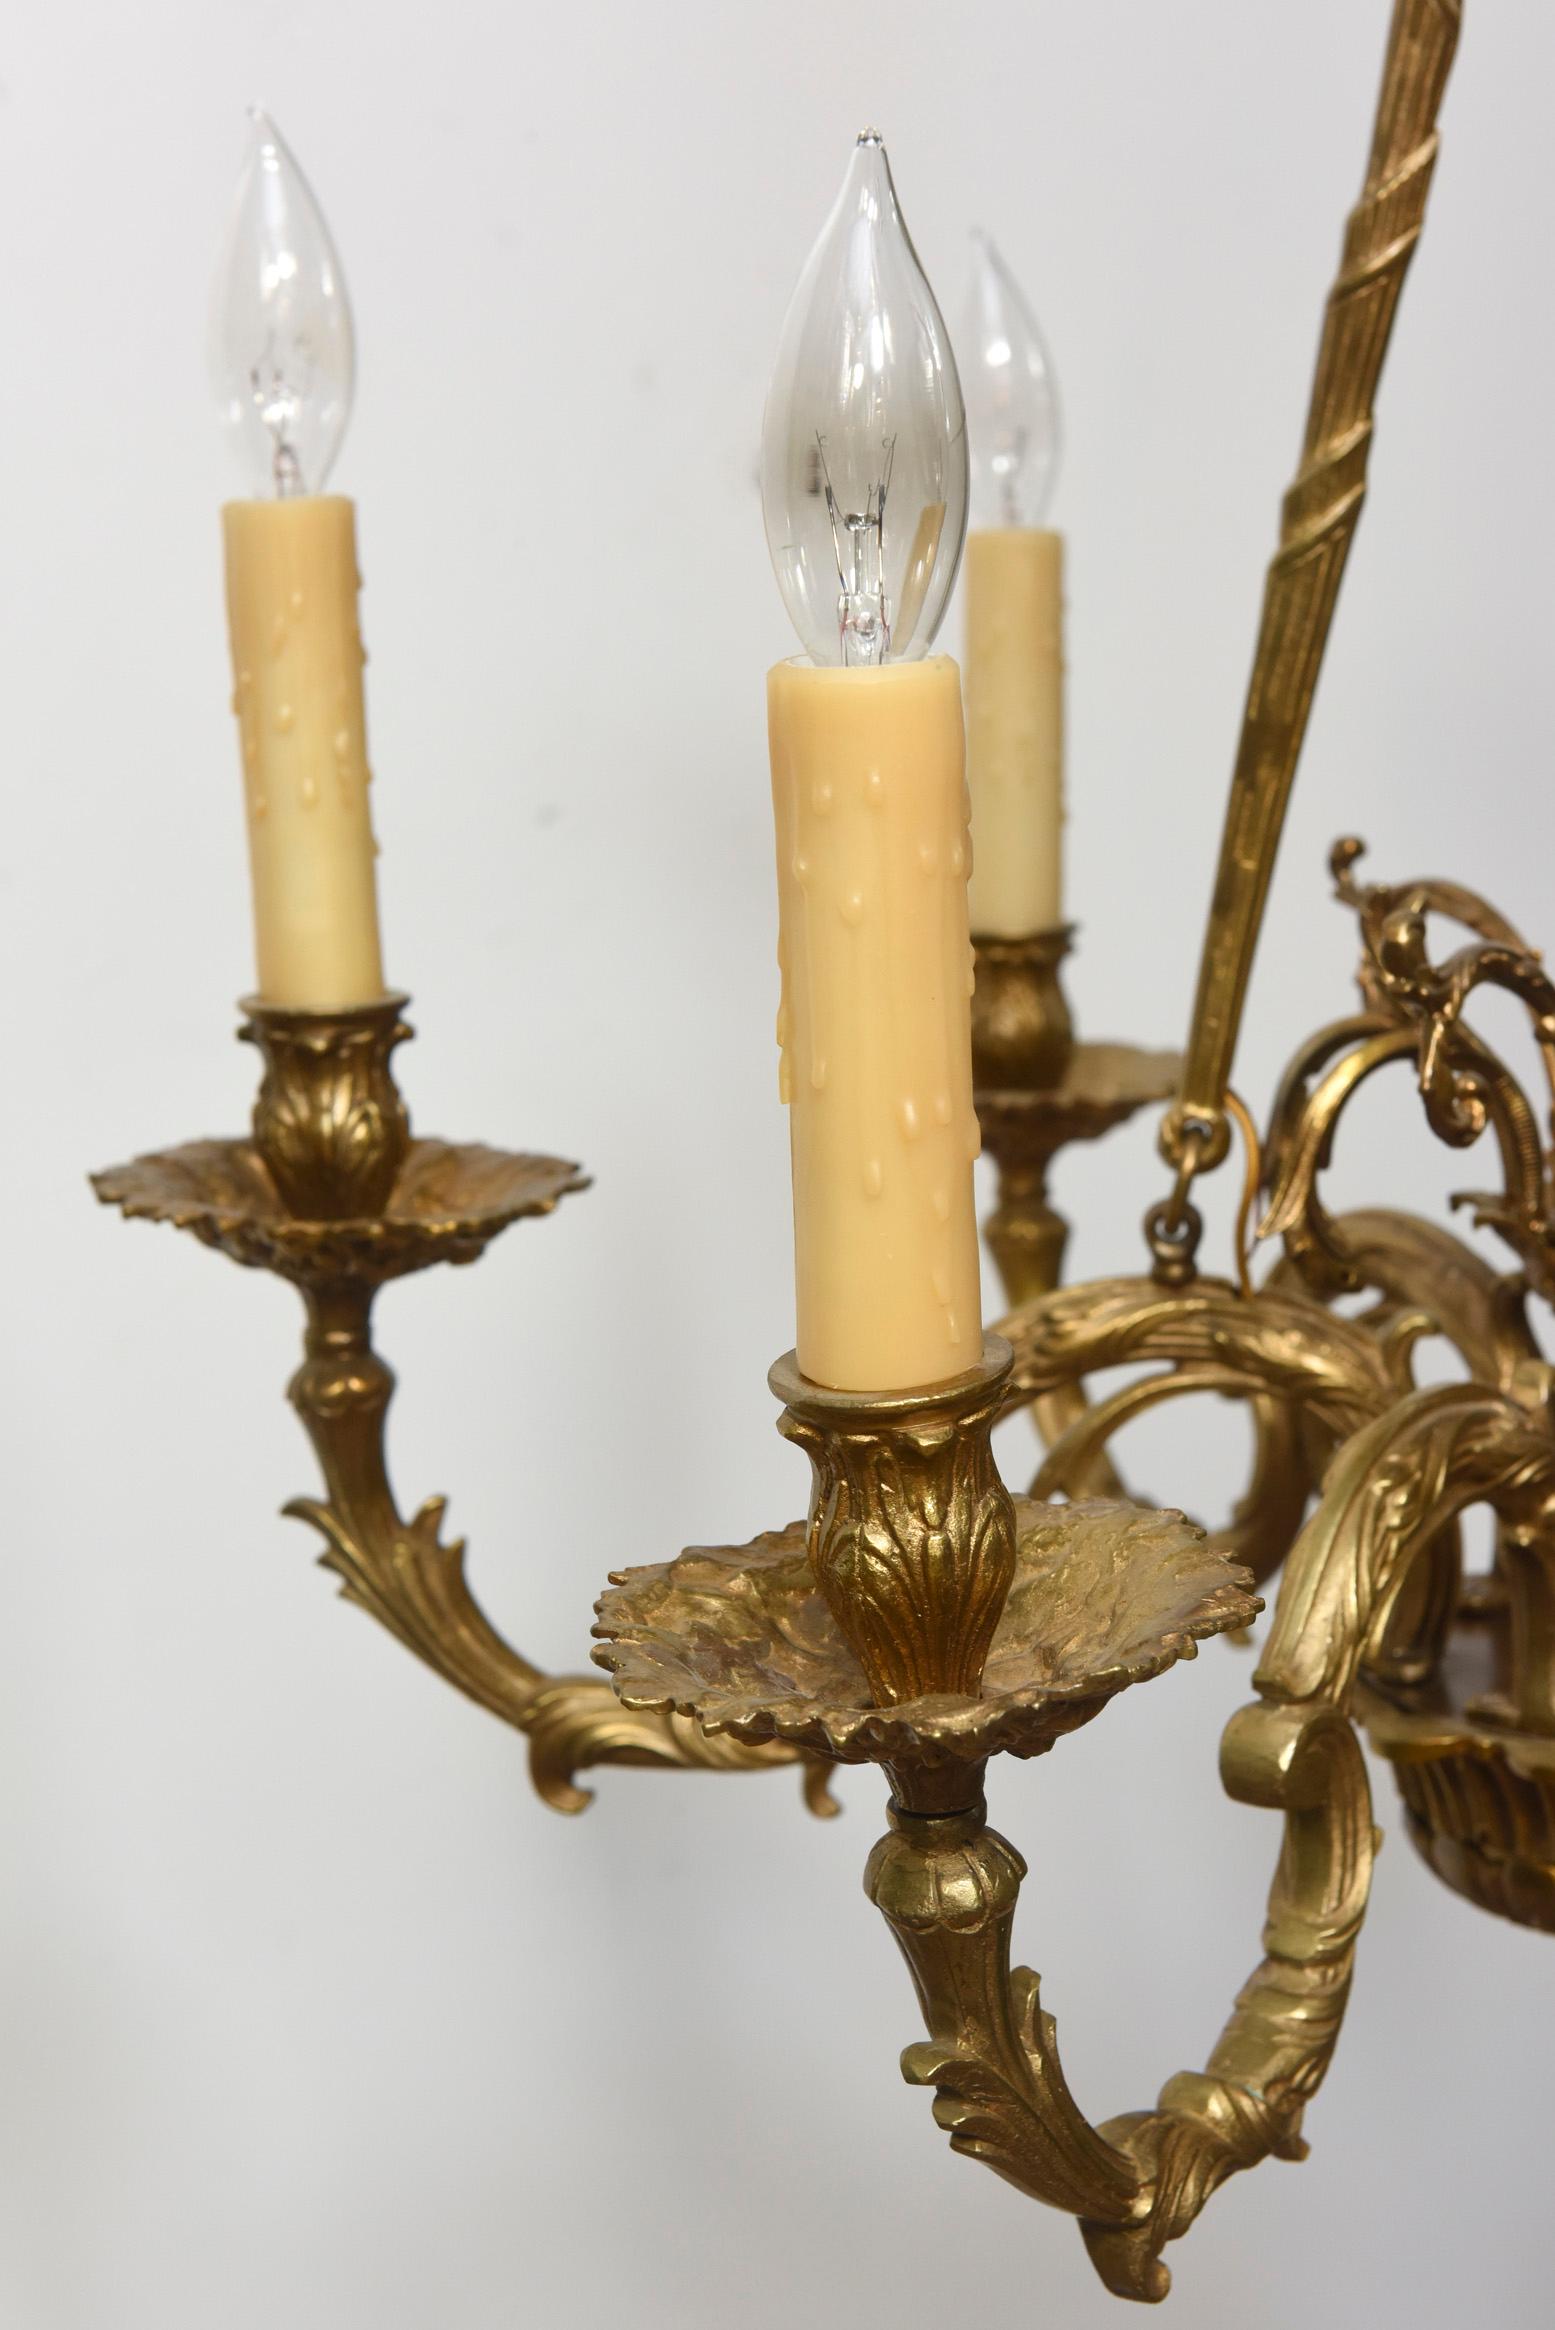 Six Arm Cast Brass Chandelier. Ornate Arms, suspended from three rods.  Mid 20th Century. Completely restored and rewired, ready to hang.

Dimensions: 
Height: 26